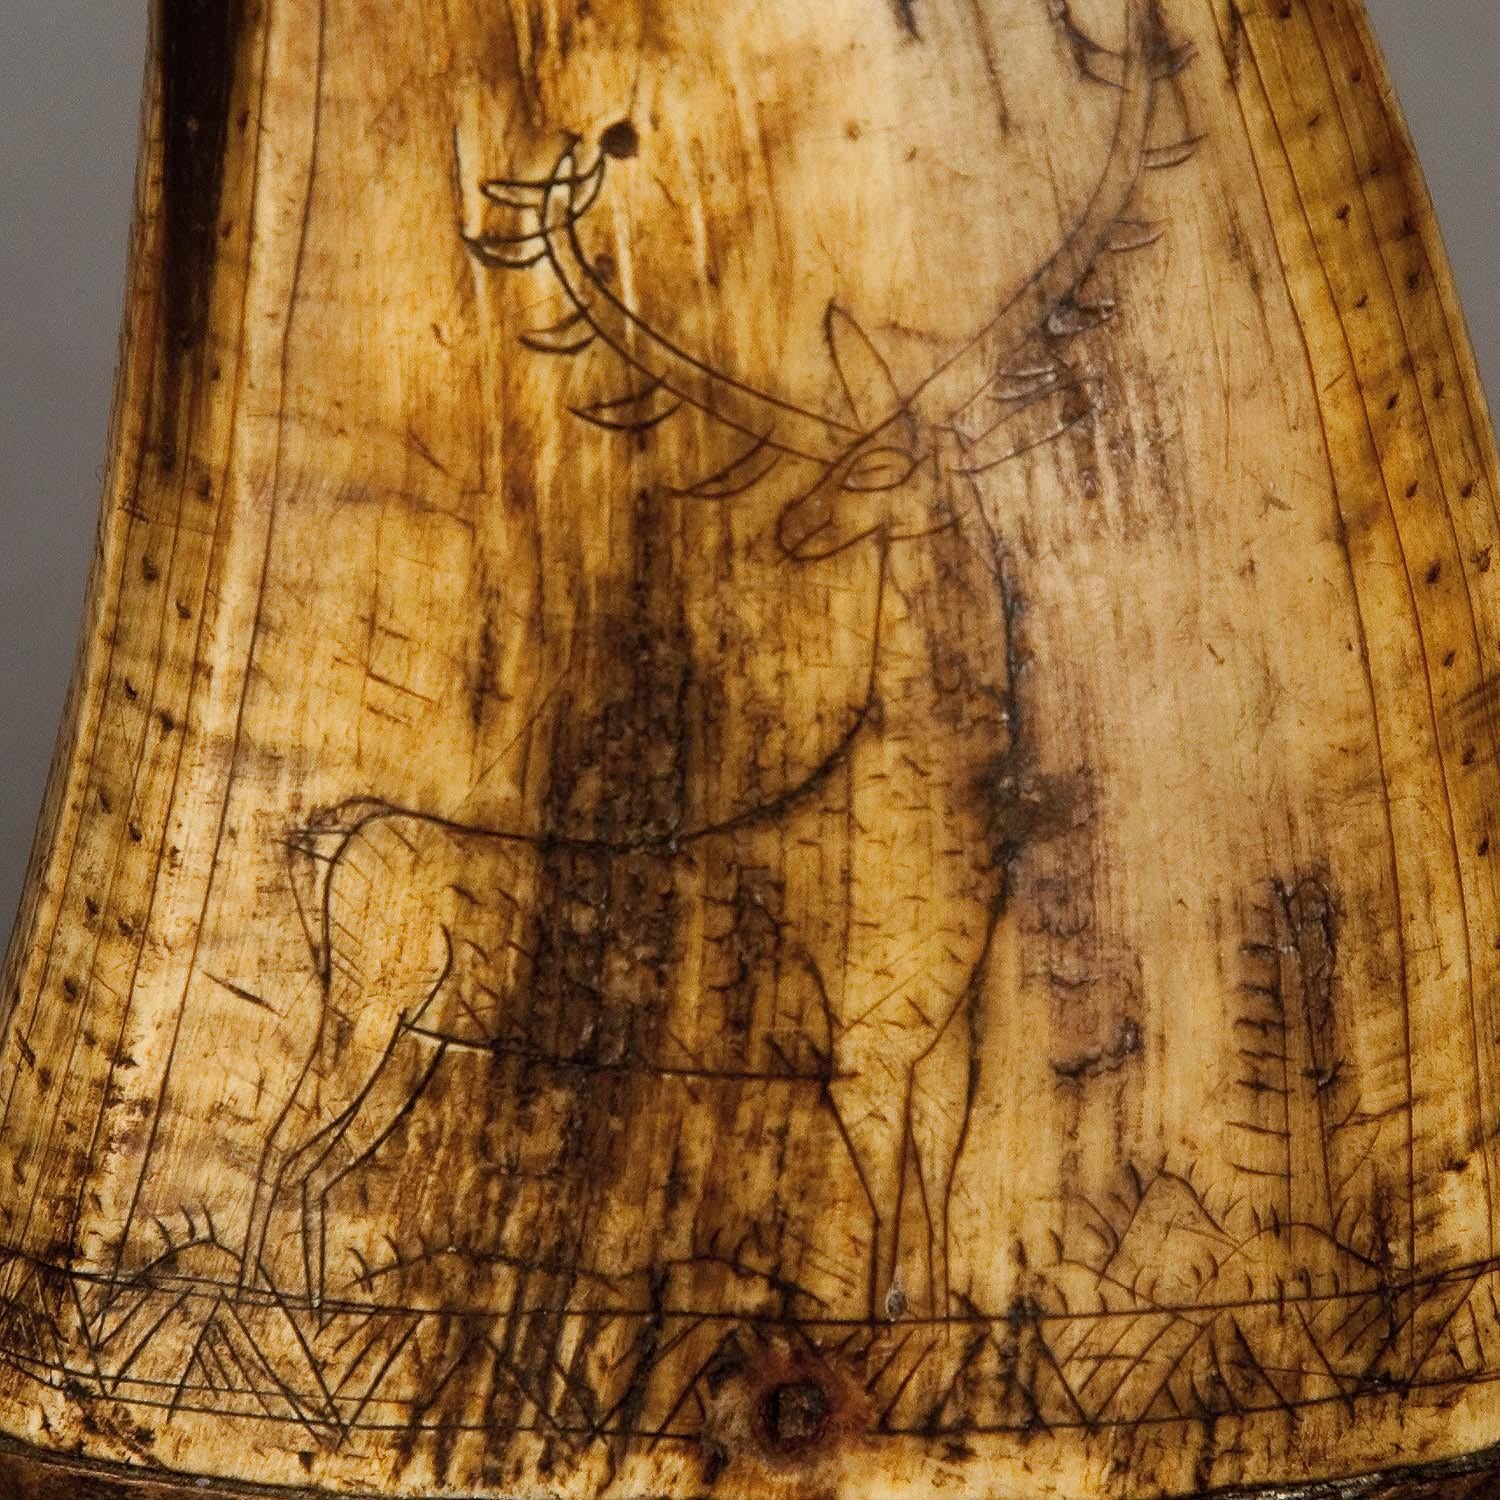 Gunpowder Horn with Great Engravings, 18th Century

An antique gunpowder horn made of horn and wood. There are engraved hunting scenes depicting a stylized deer and a chamois group in a rocky scenery. It is handmade in Germany in second half of the